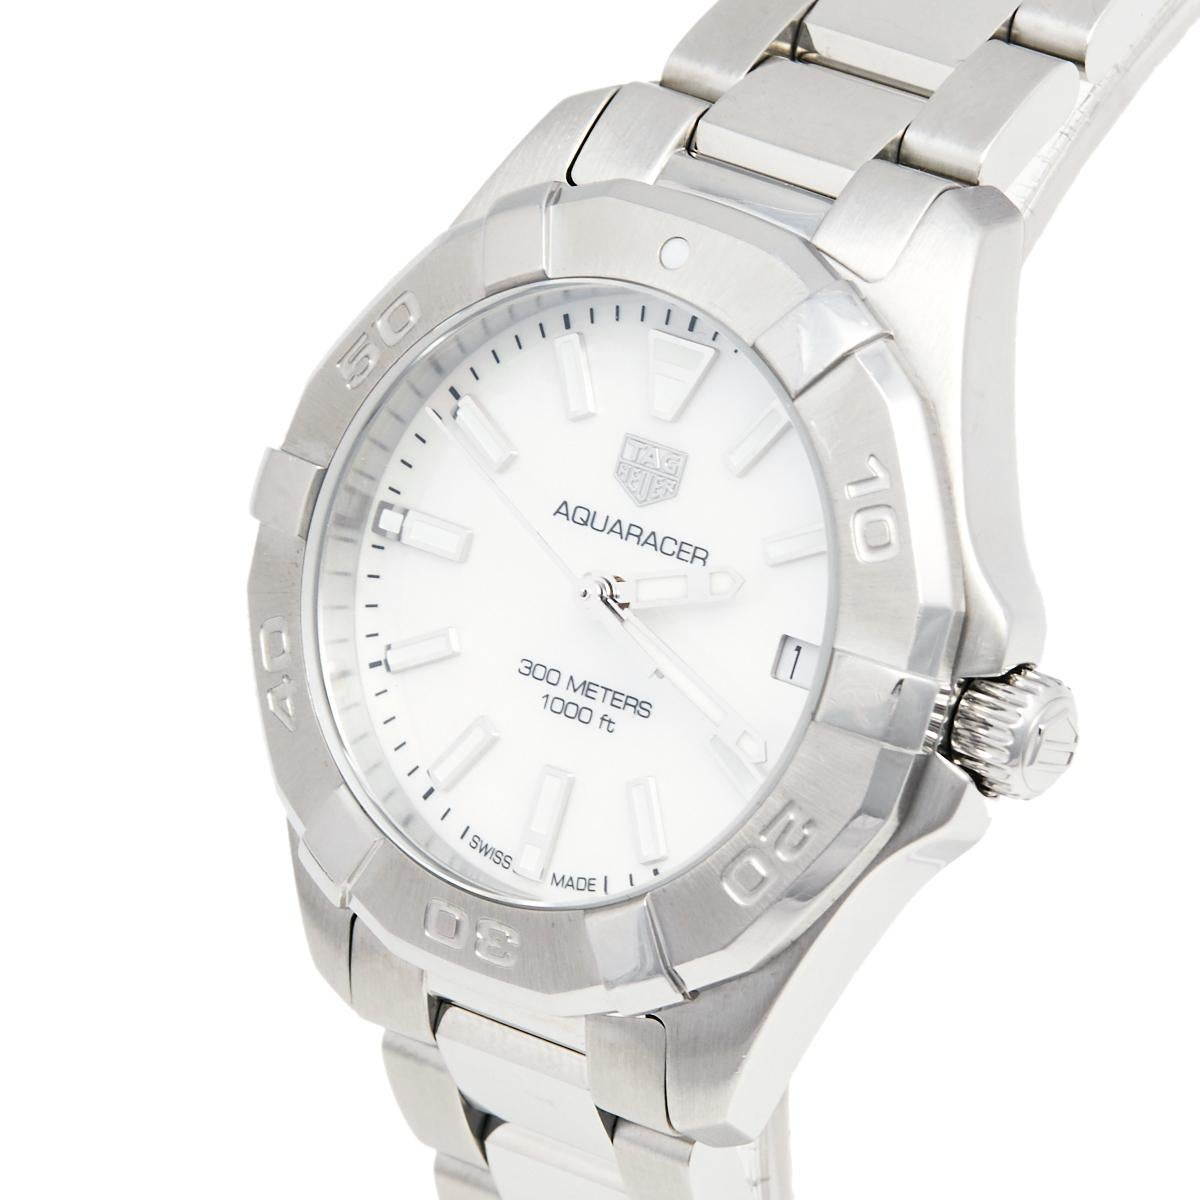 Don luxury on your wrist by owning this exquisite Aquaracer timepiece from Tag Heuer. Swiss-made, the watch has been expertly crafted from stainless steel. A scratch-resistant sapphire crystal glass protects a mother of pearl dial with minute